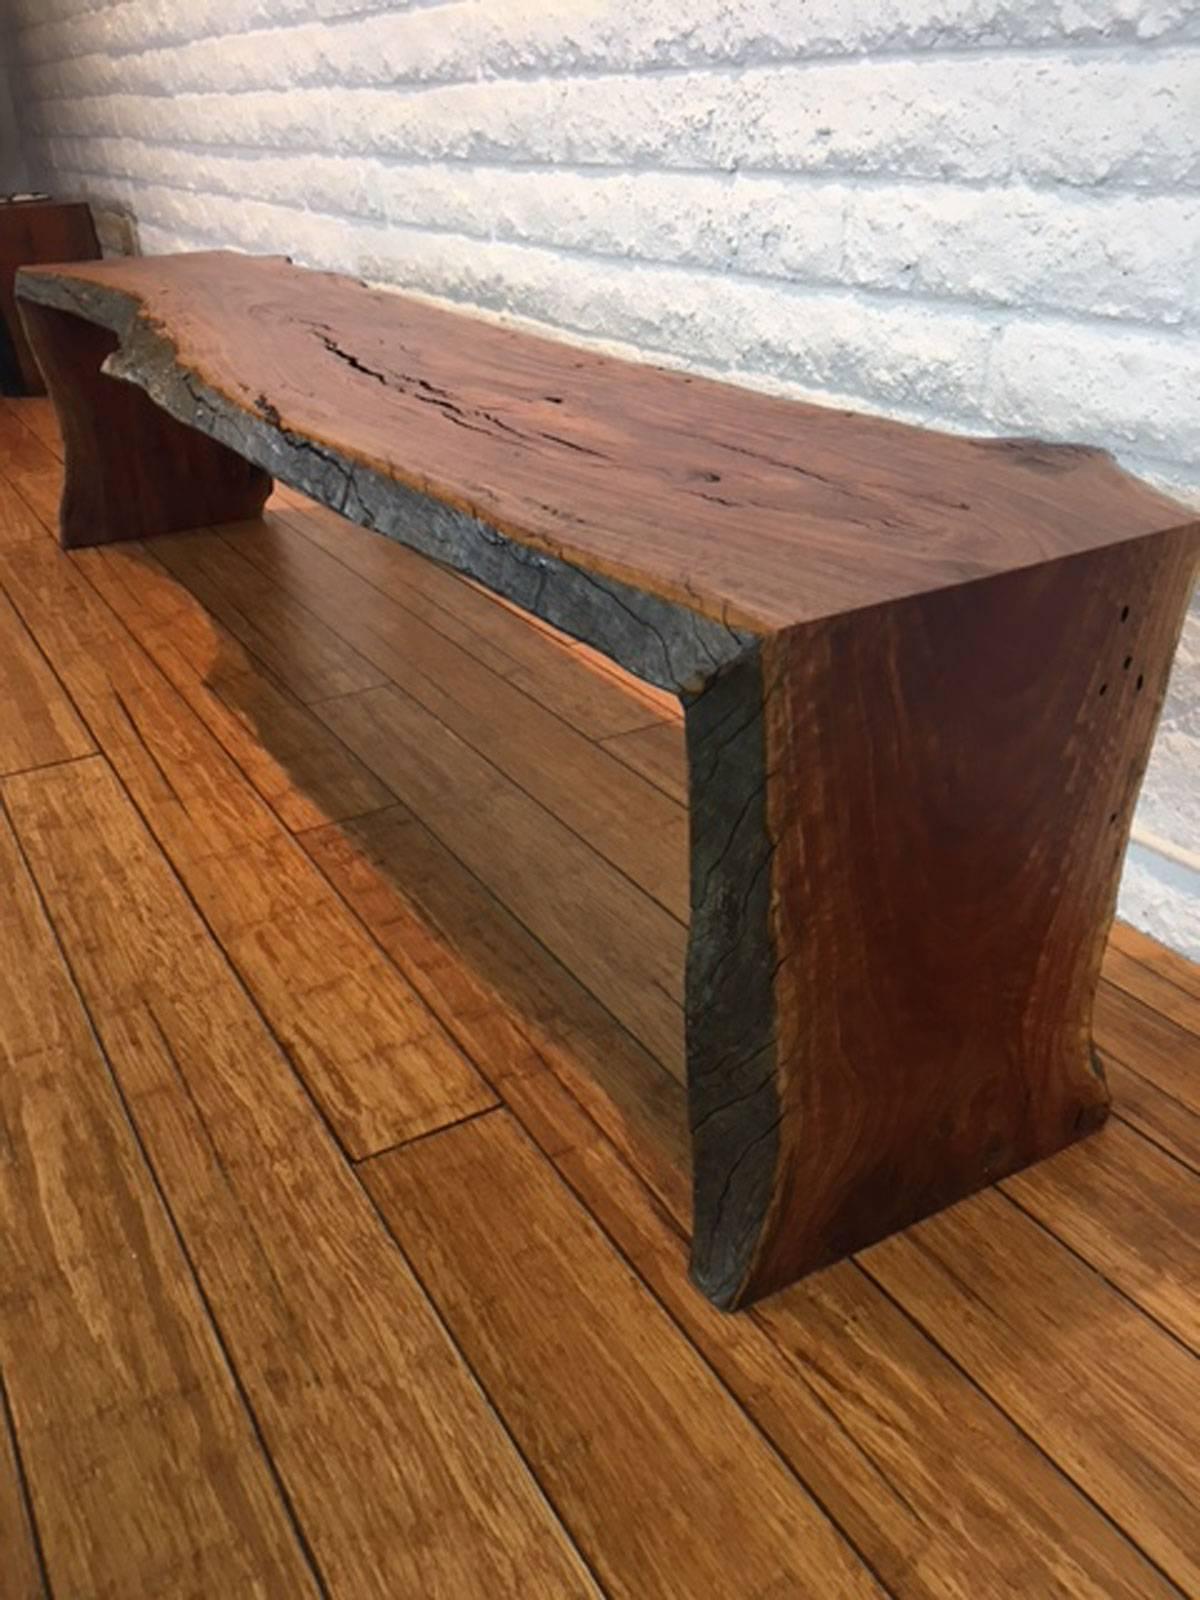 Eucalyptus wood long bench designed, produced and made by master wood artist and designer Scott Mills who only uses reclaimed (deadfall or storm downed trees) in the pieces he designs and produces. This piece is big, solid and eye-catching.